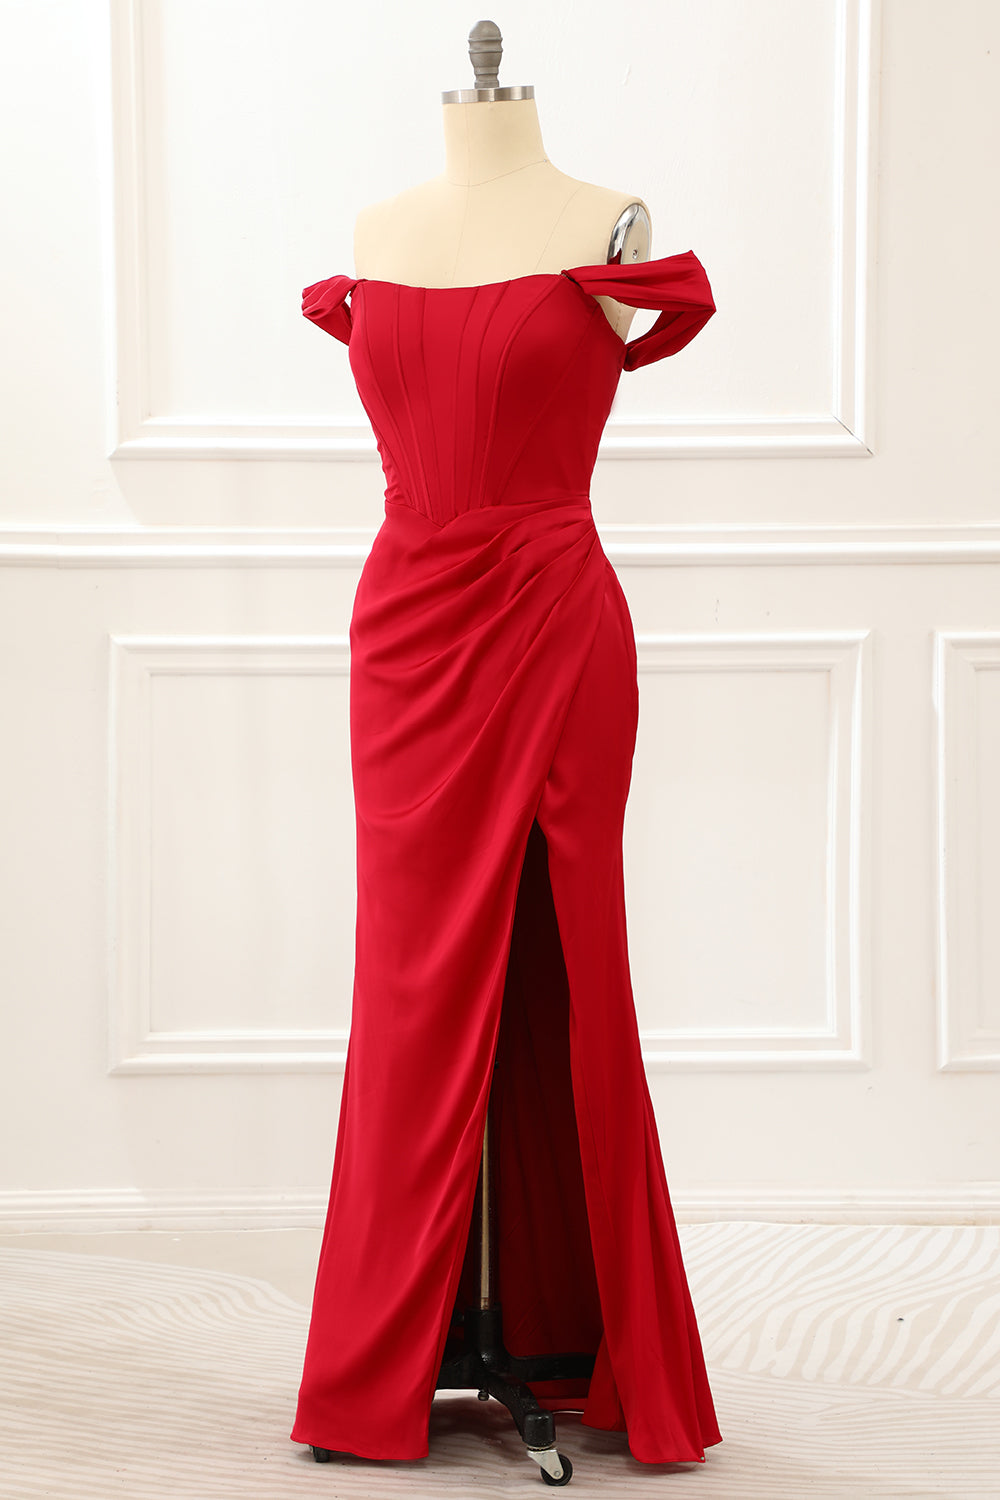 Formal Dress Outfits, Off the Shoulder Ruffles Burgundy Prom Dress with Slit